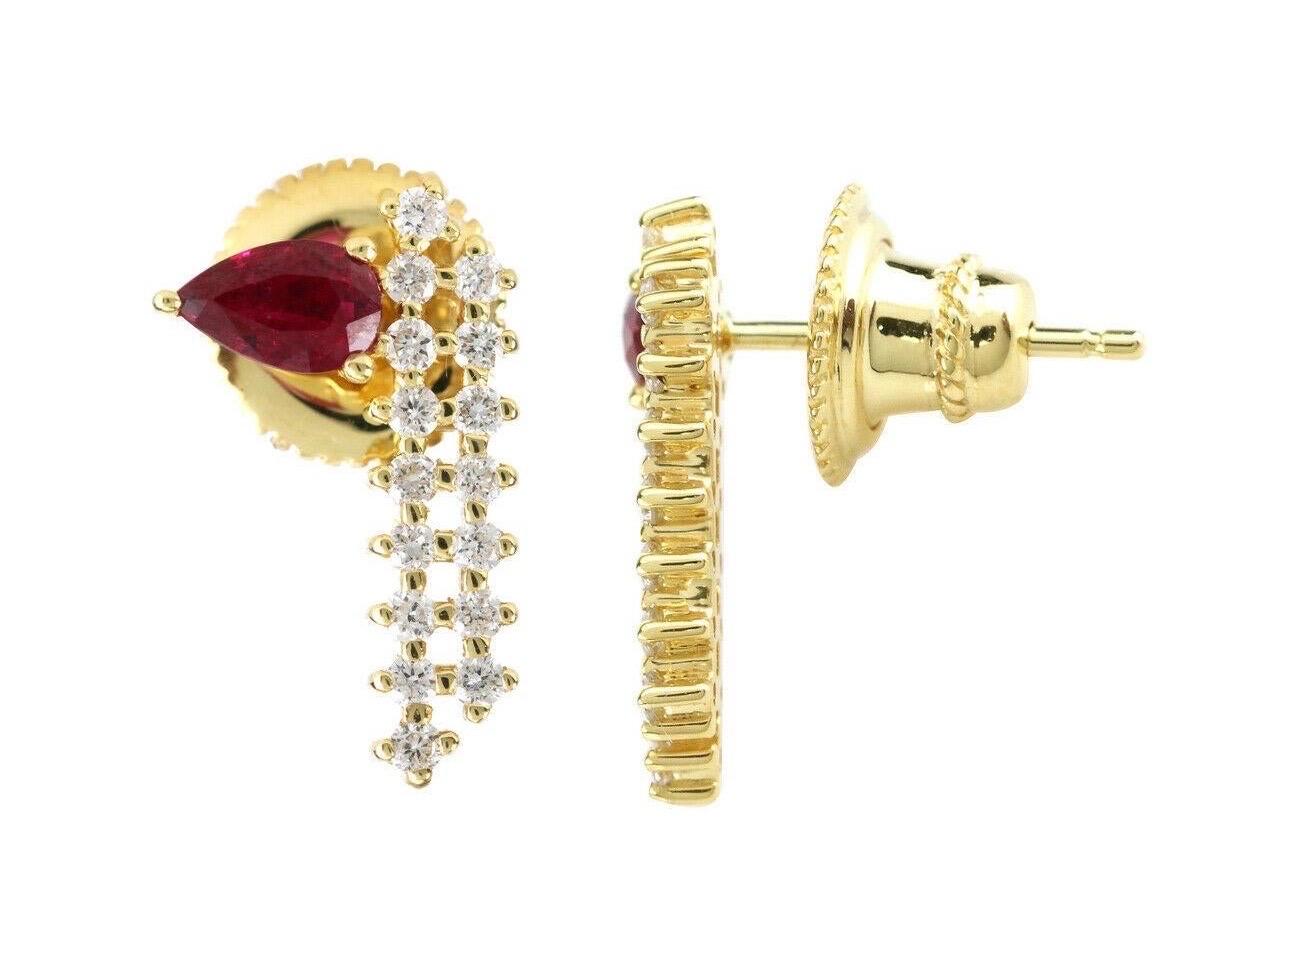 Cast from 14-karat yellow gold, these beautiful earrings are hand set with .62 carats ruby and .35 carats of sparkling diamonds. 

FOLLOW MEGHNA JEWELS storefront to view the latest collection & exclusive pieces. Meghna Jewels is proudly rated as a